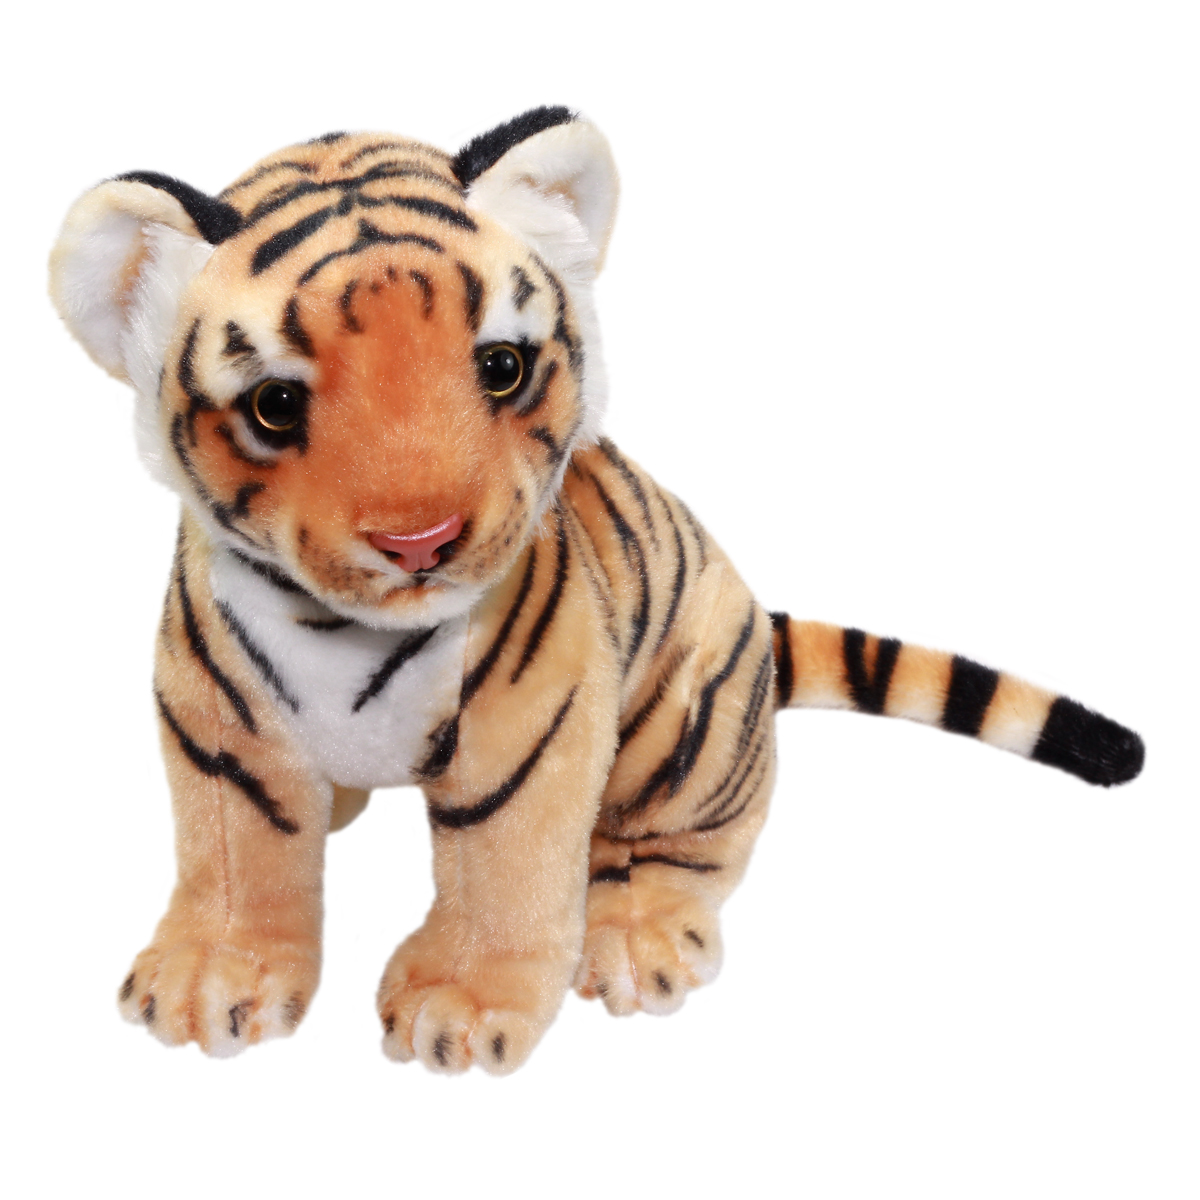 Real Animal Plush Collection Stuffed Animal Toy Bengal Tiger 10 Inches